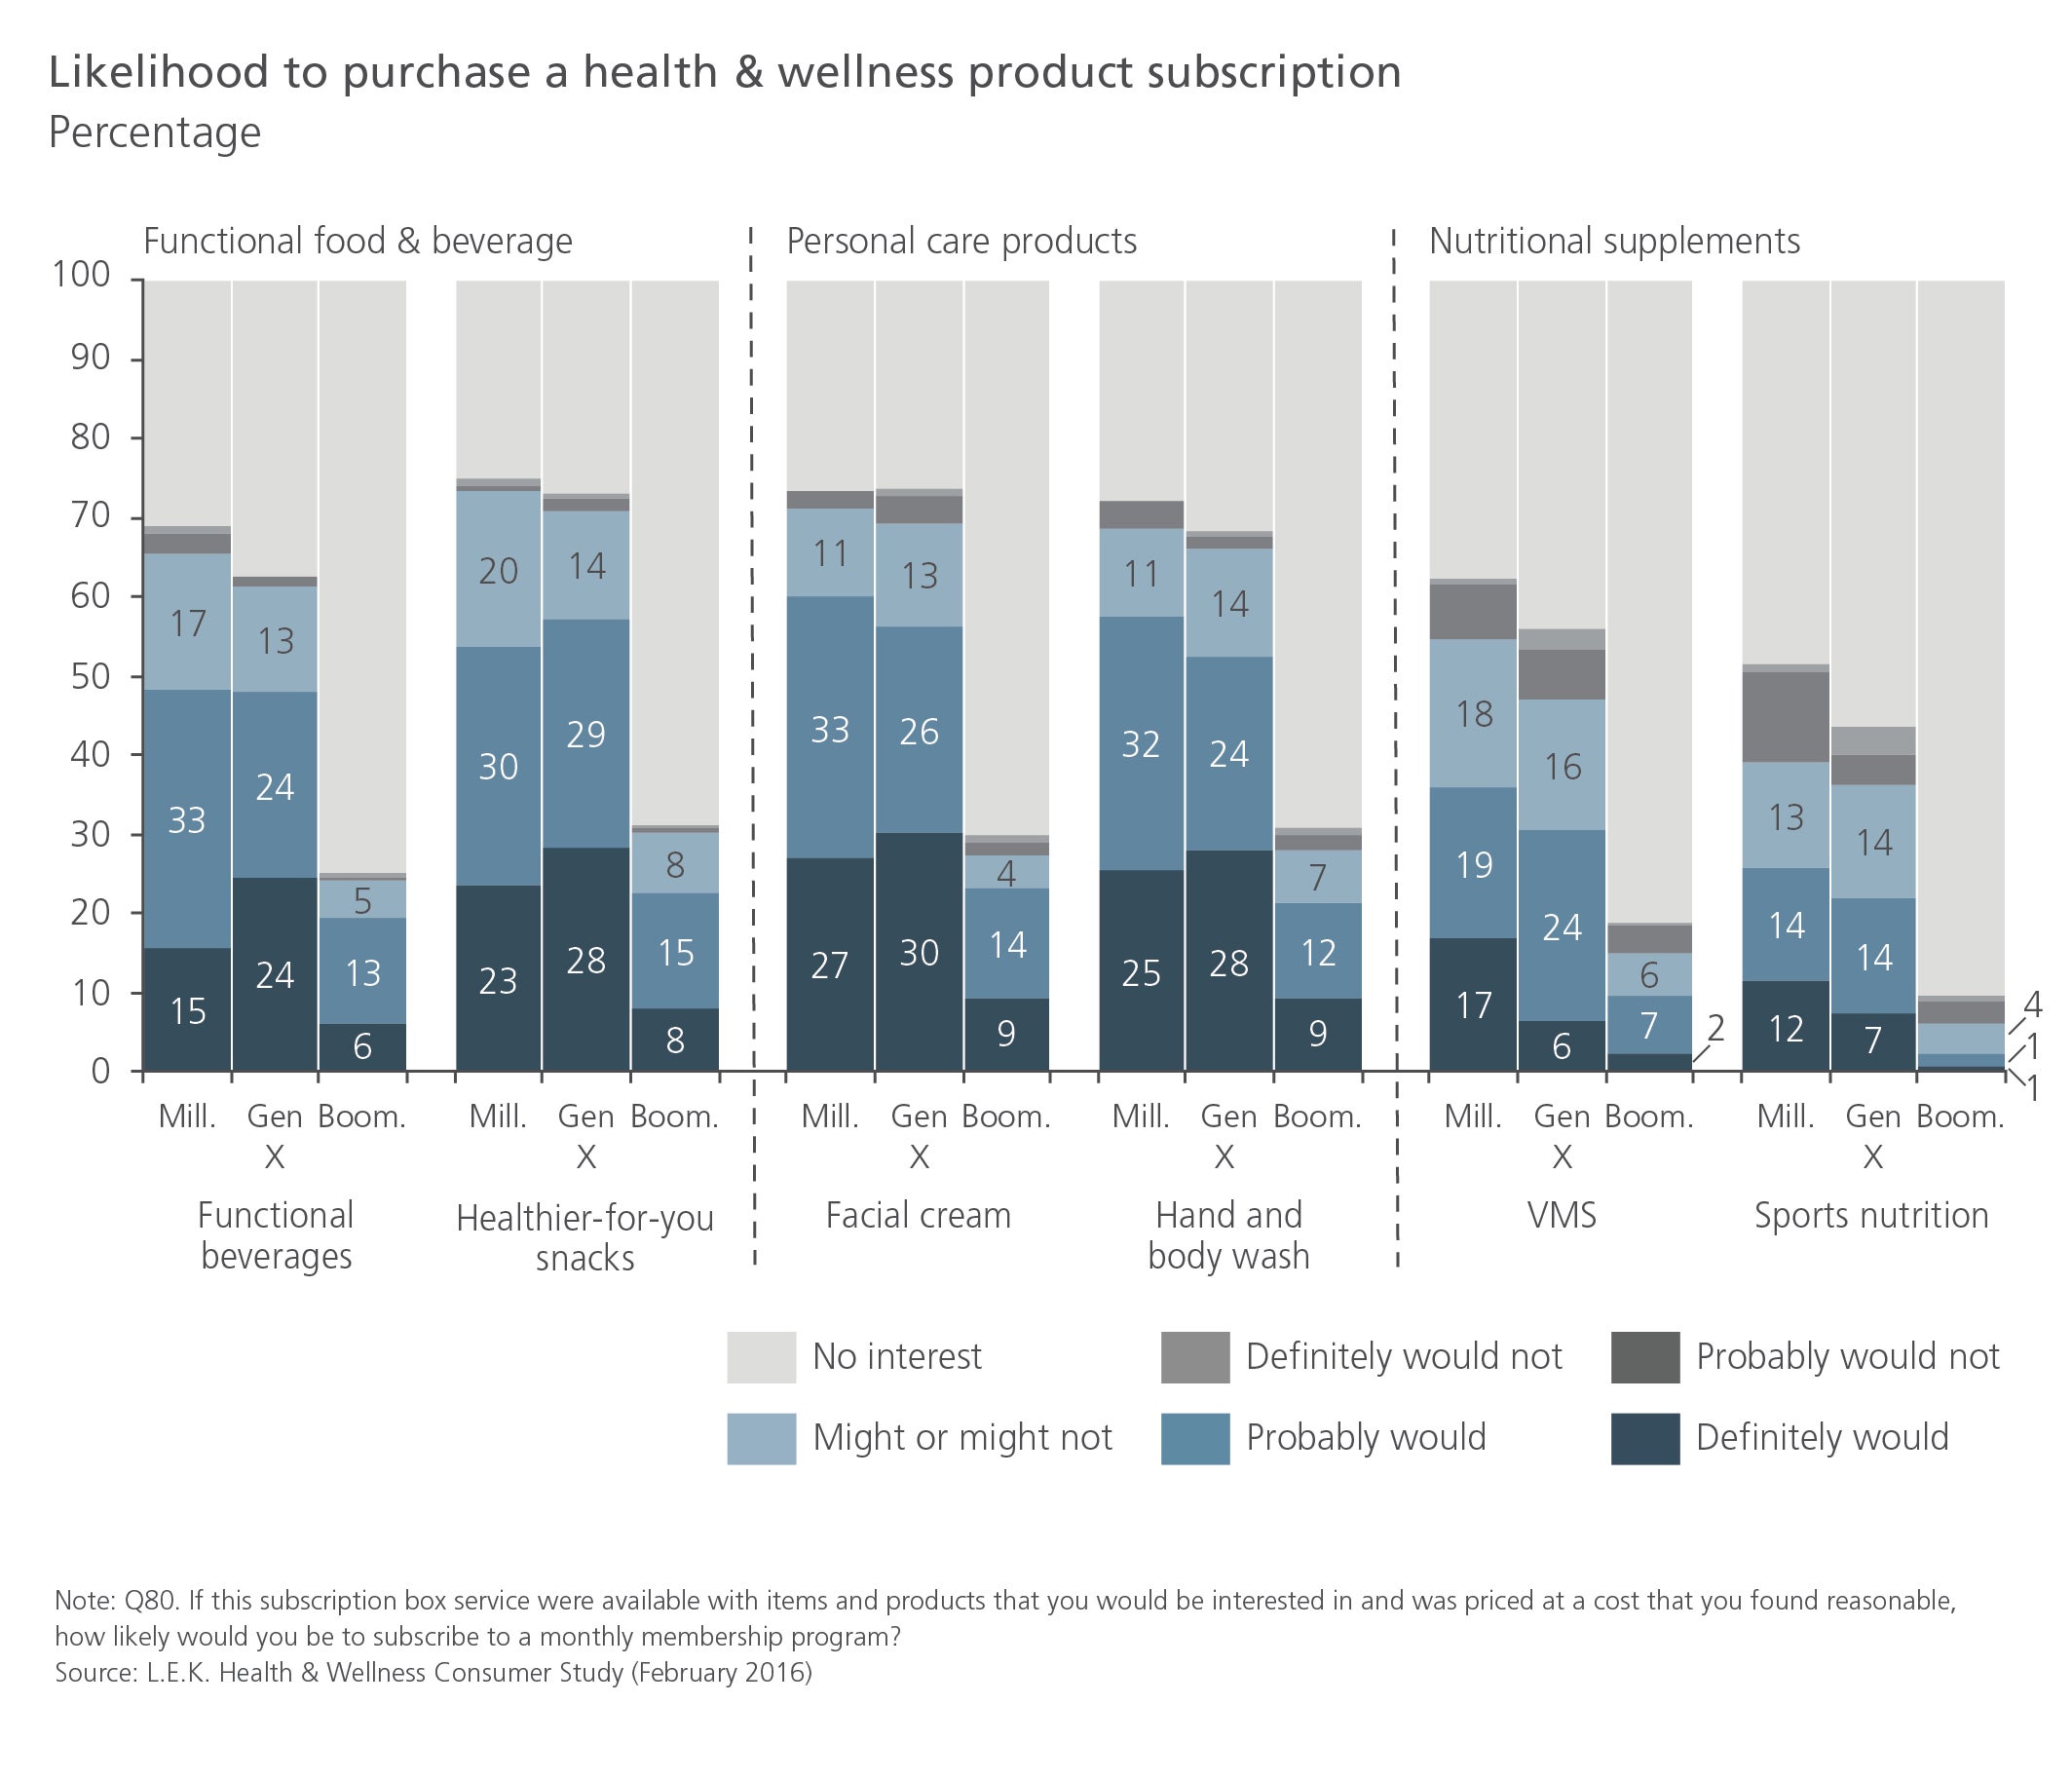 Likelihood to purchase a health & wellness product subscription